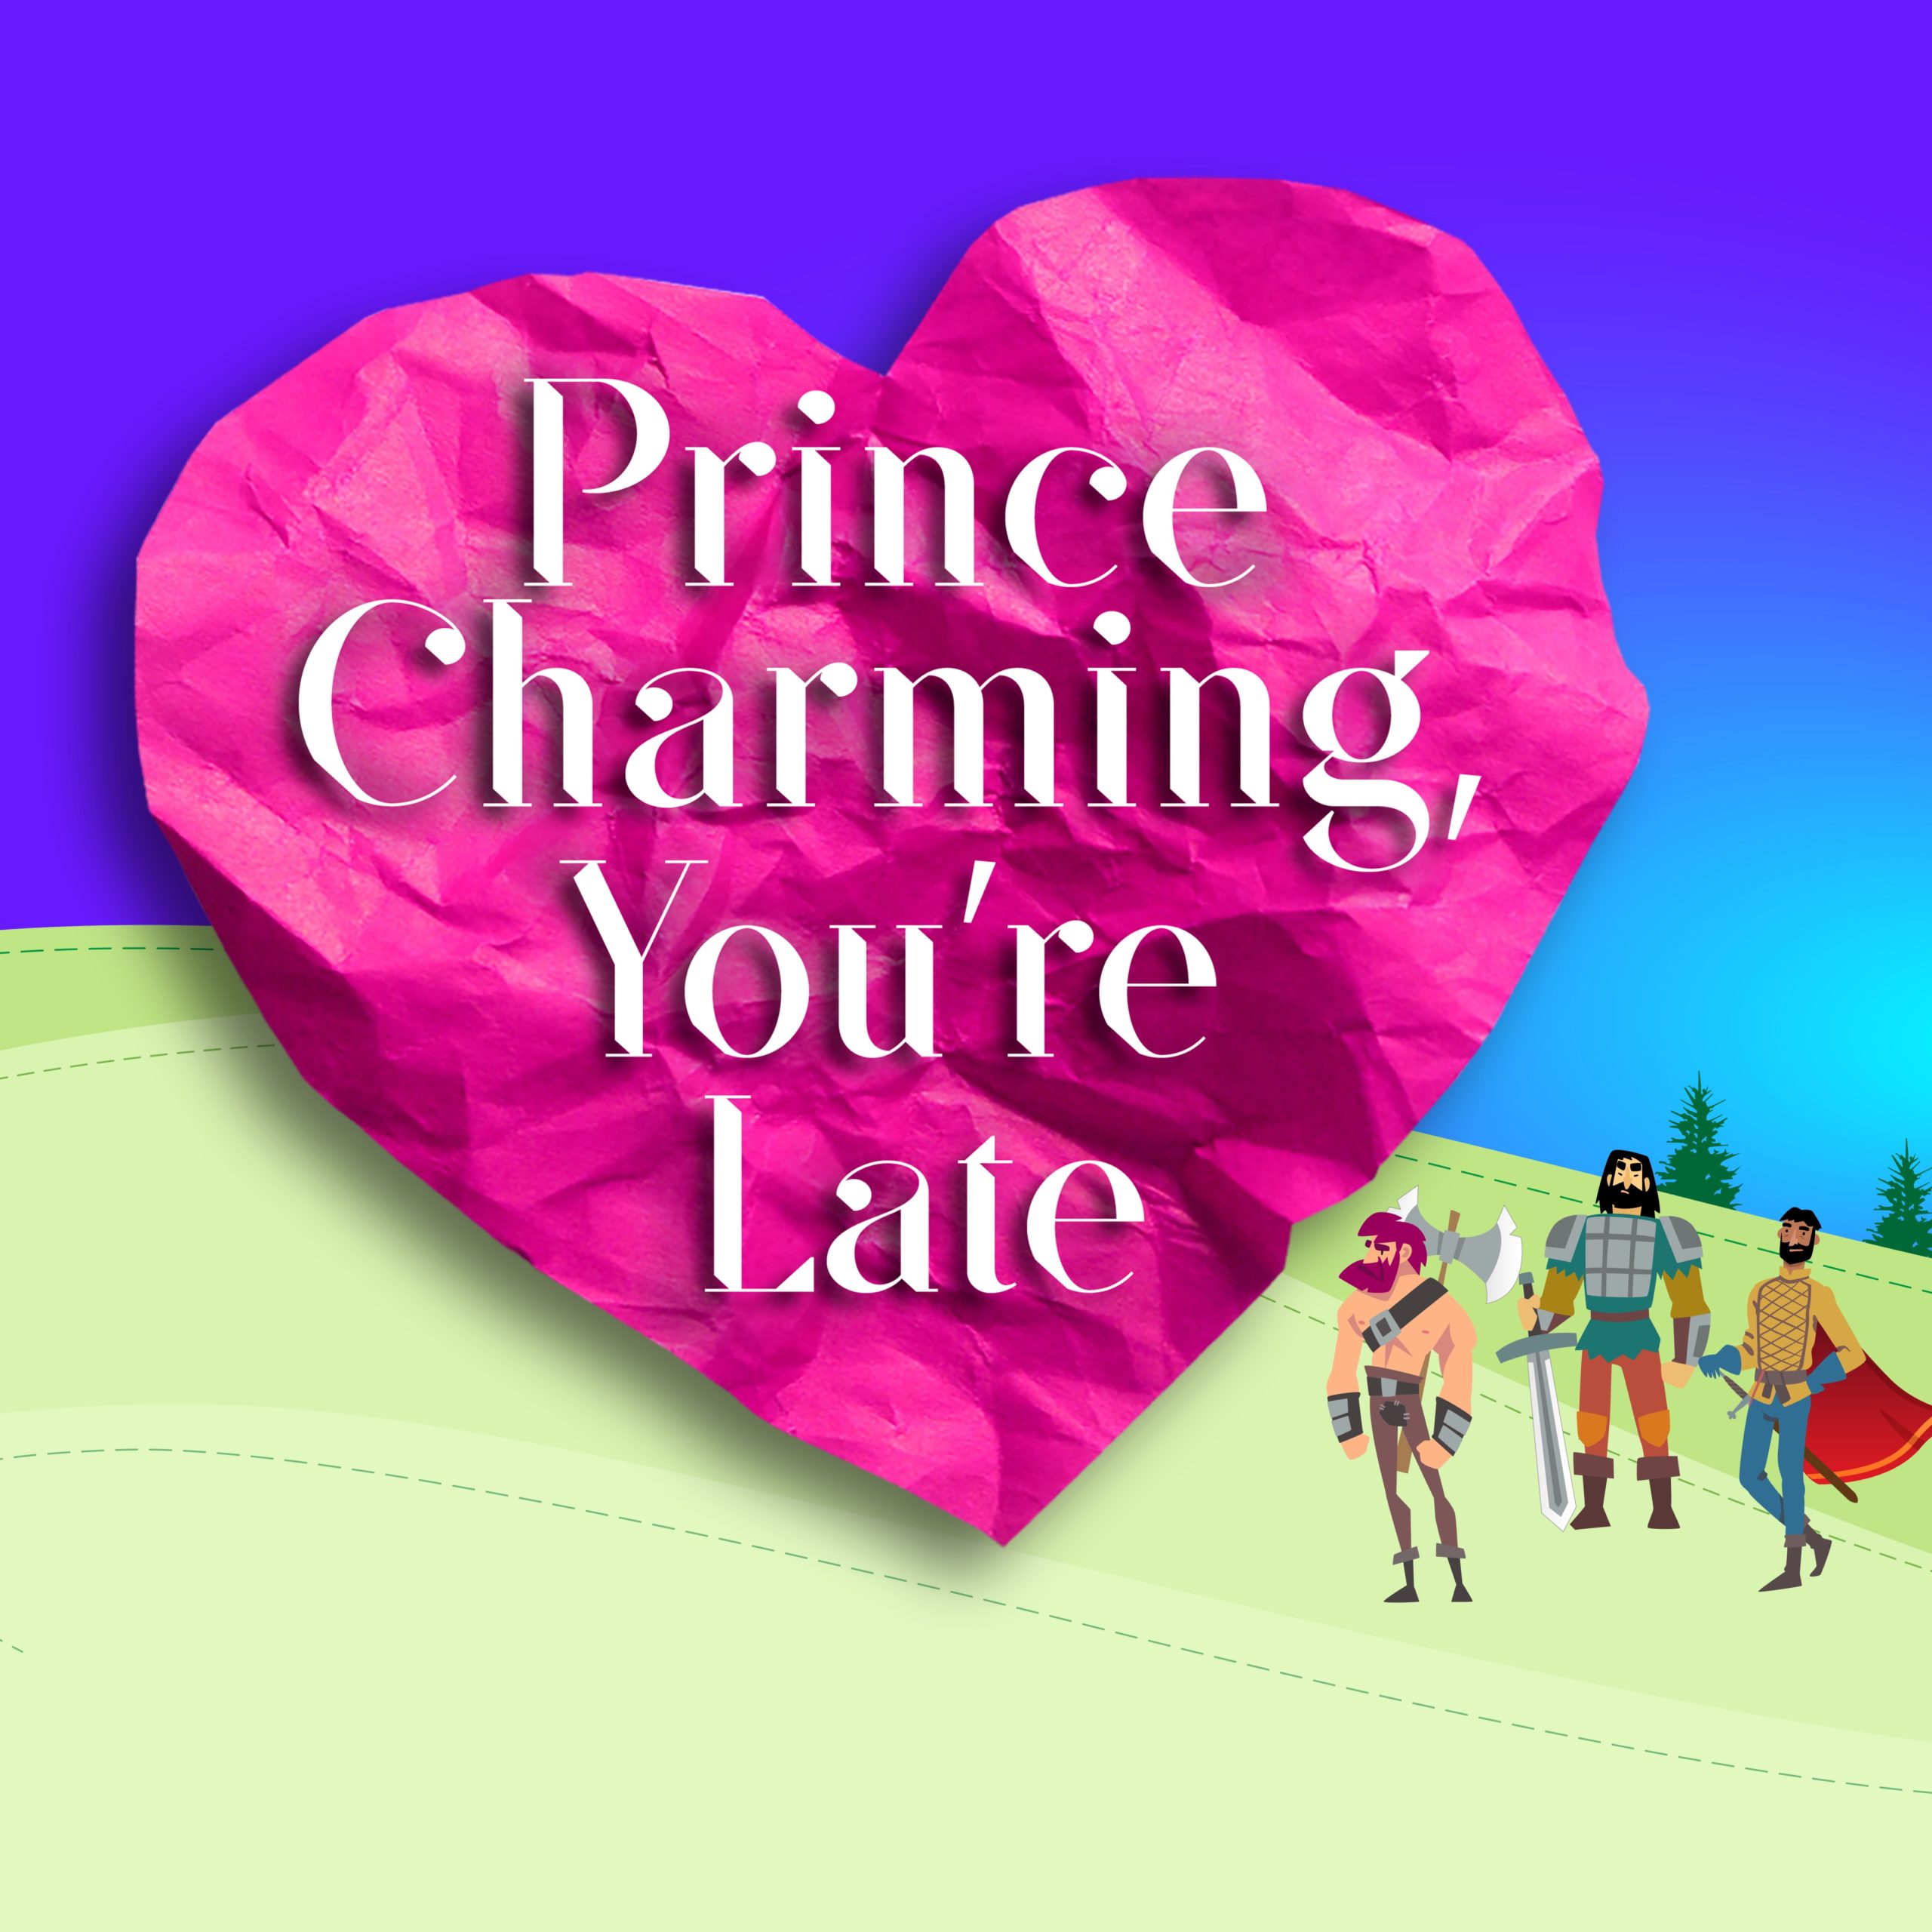 Prince Charming, You’re Late